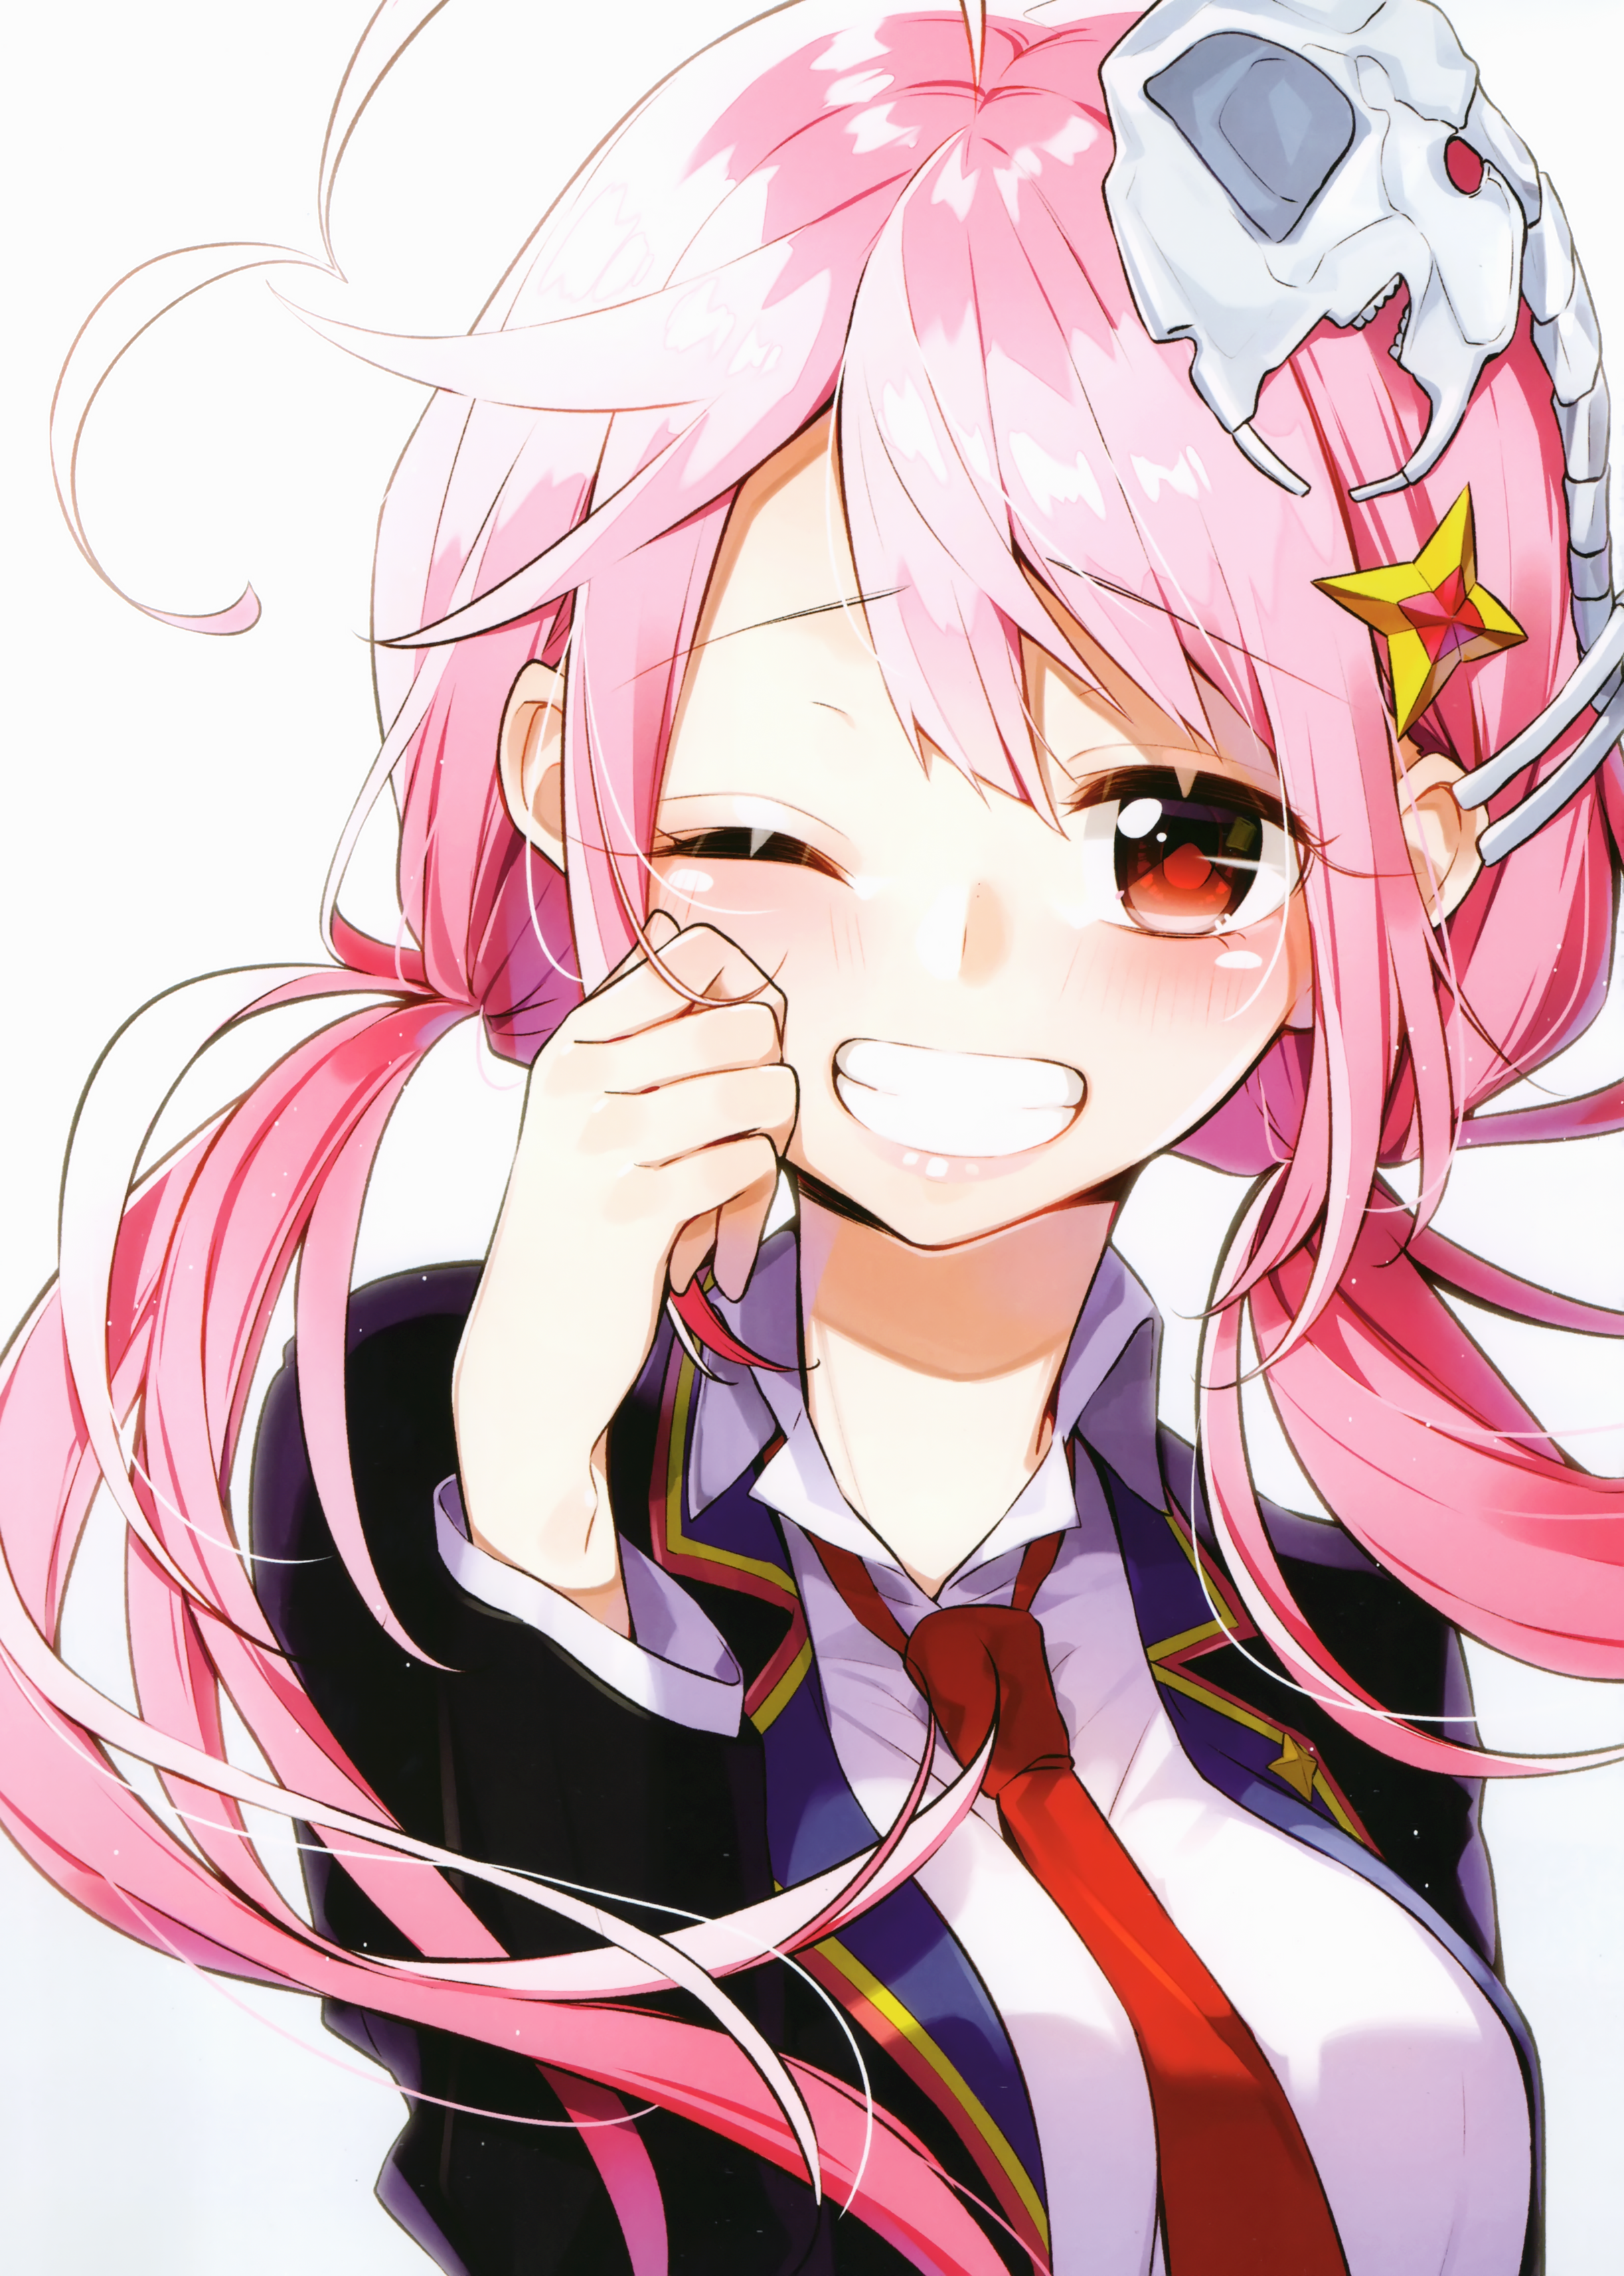 Artwork Illustration Anime Anime Girls Hand On Face Smiling Pink Hair Winking Red Eyes Twintails Loo 2426x3400